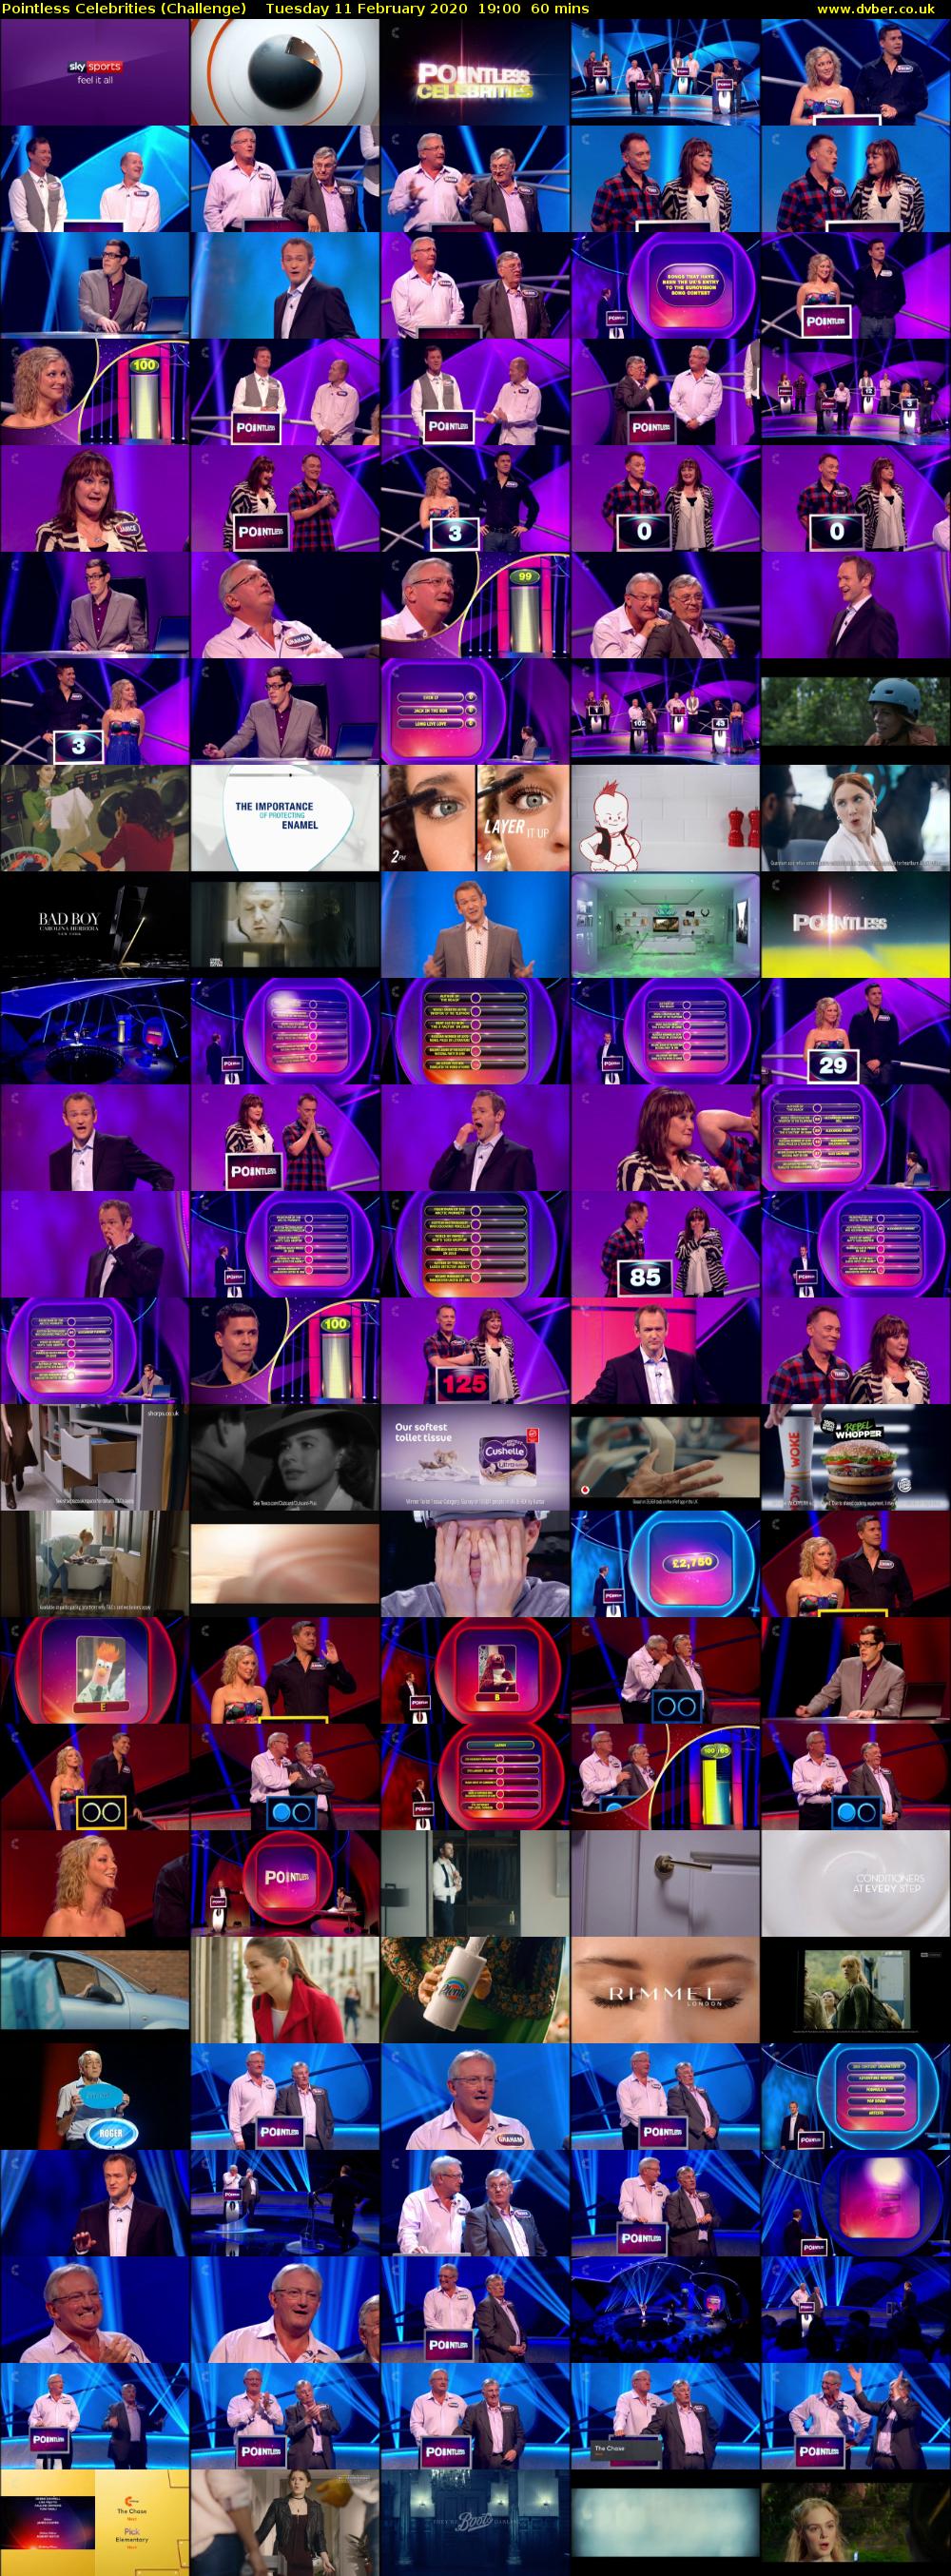 Pointless Celebrities (Challenge) Tuesday 11 February 2020 19:00 - 20:00